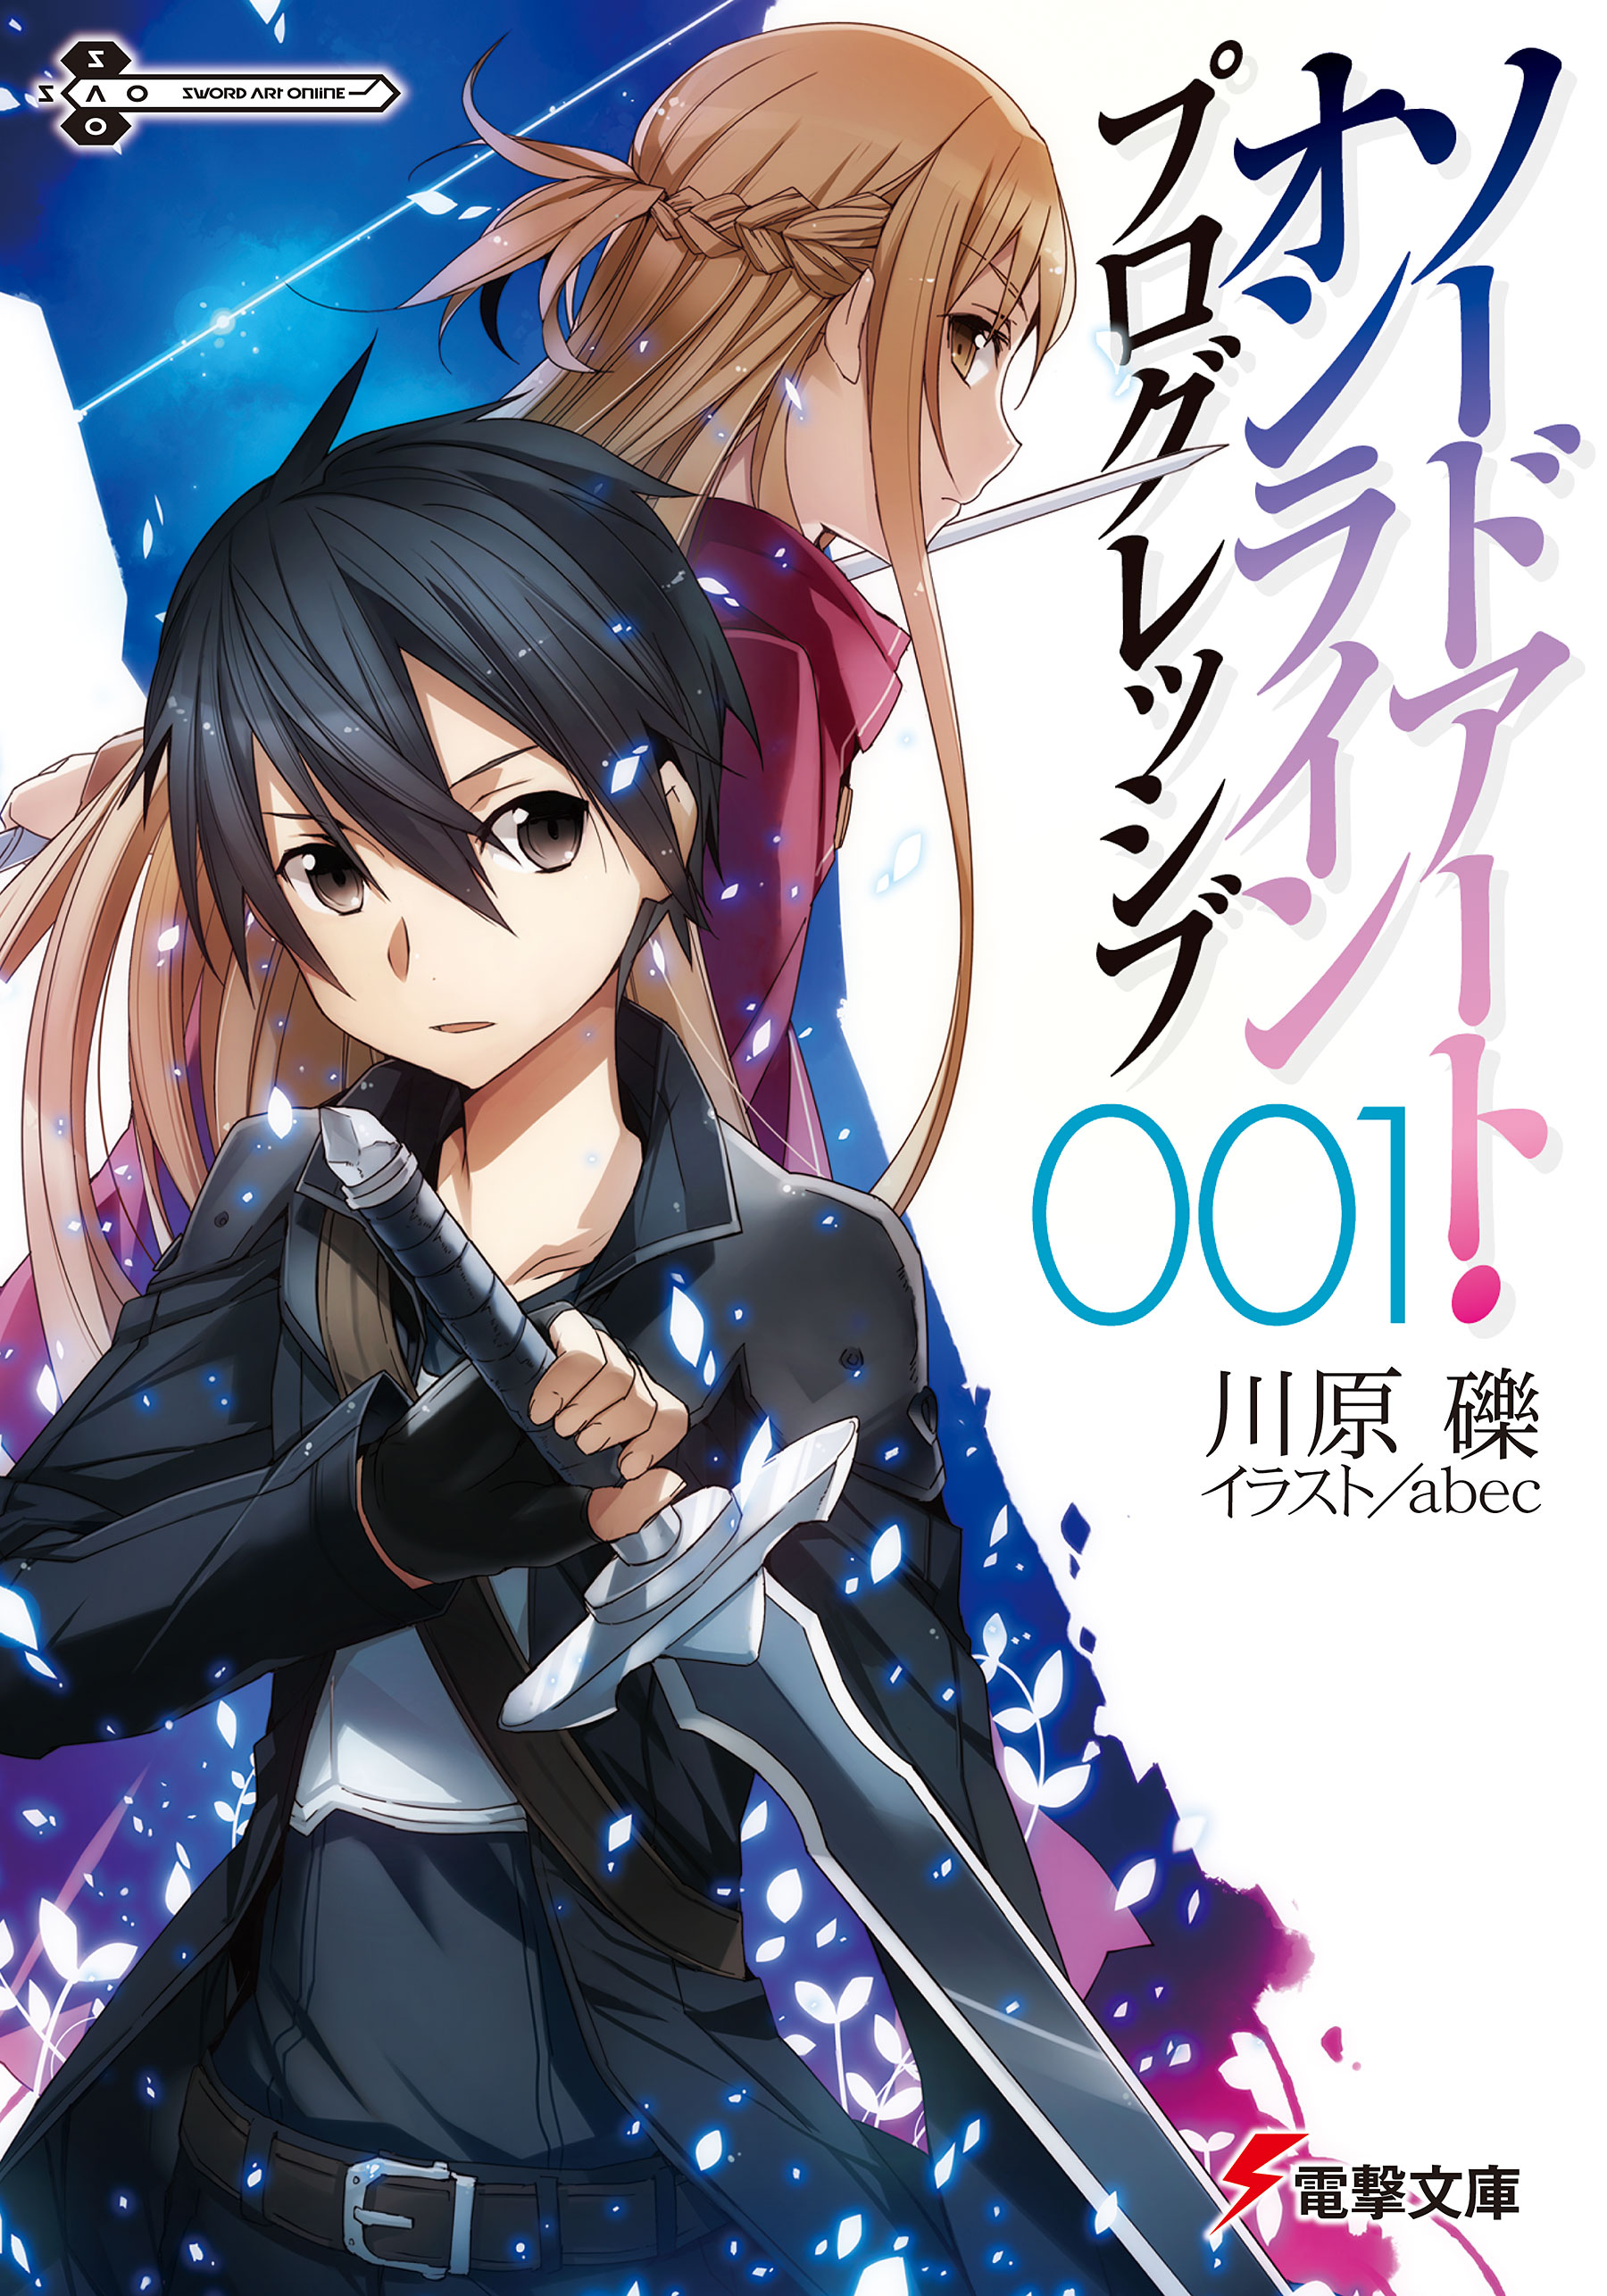 The upcoming title in the Sword Art Online franchise, SWORD ART